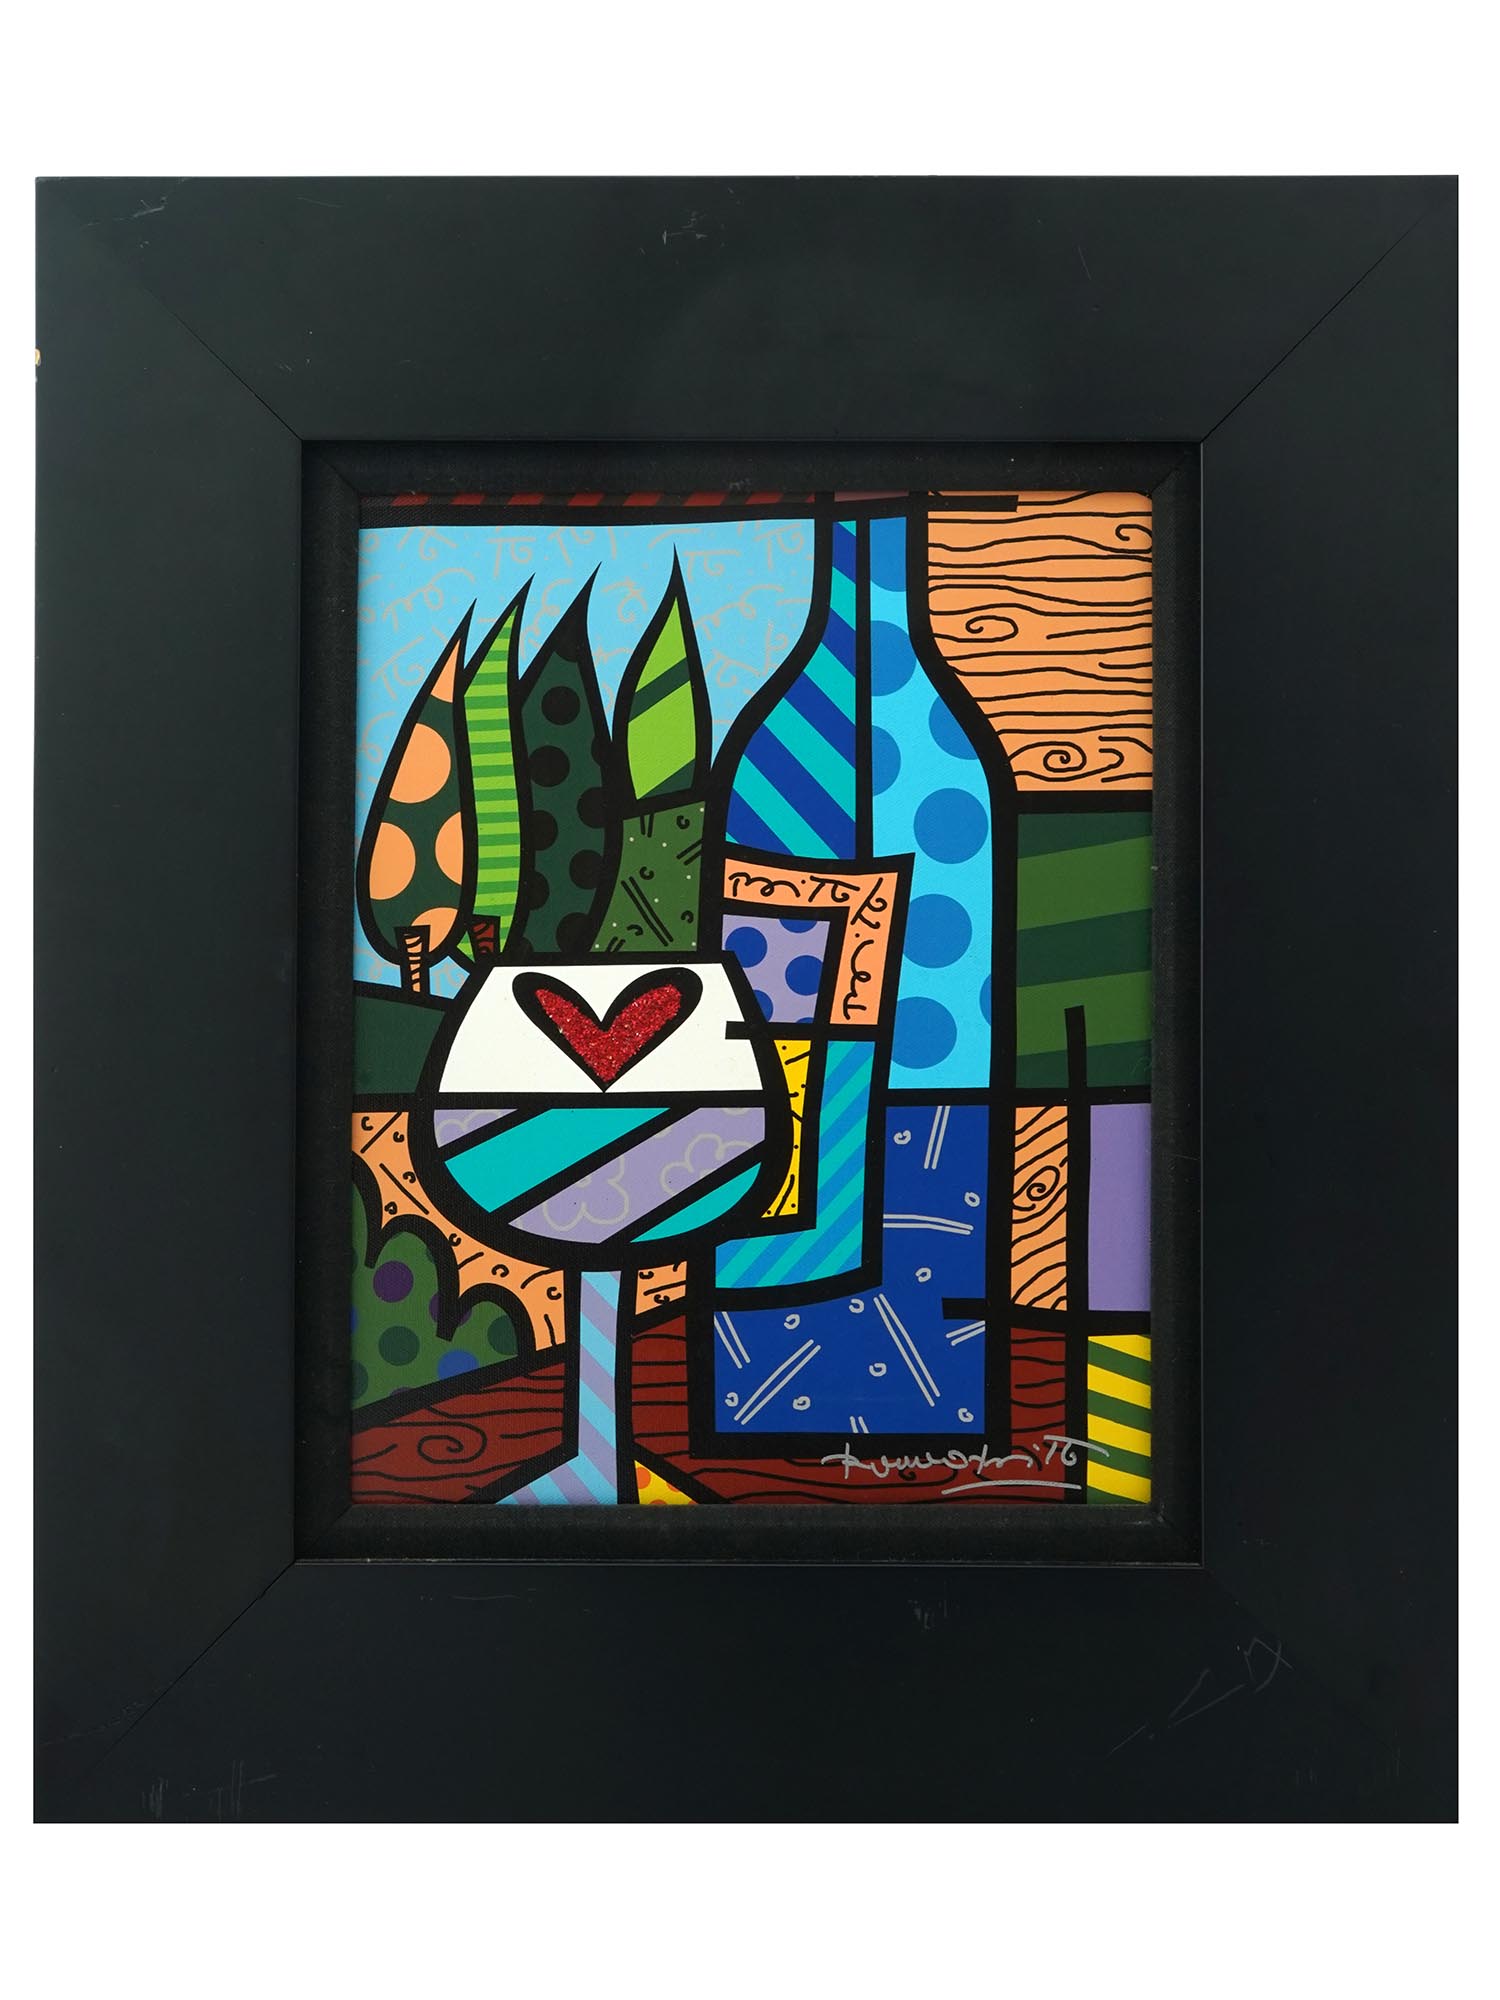 LIMITED ED GICLEE ON CANVAS PRINT BY ROMERO BRITTO PIC-0